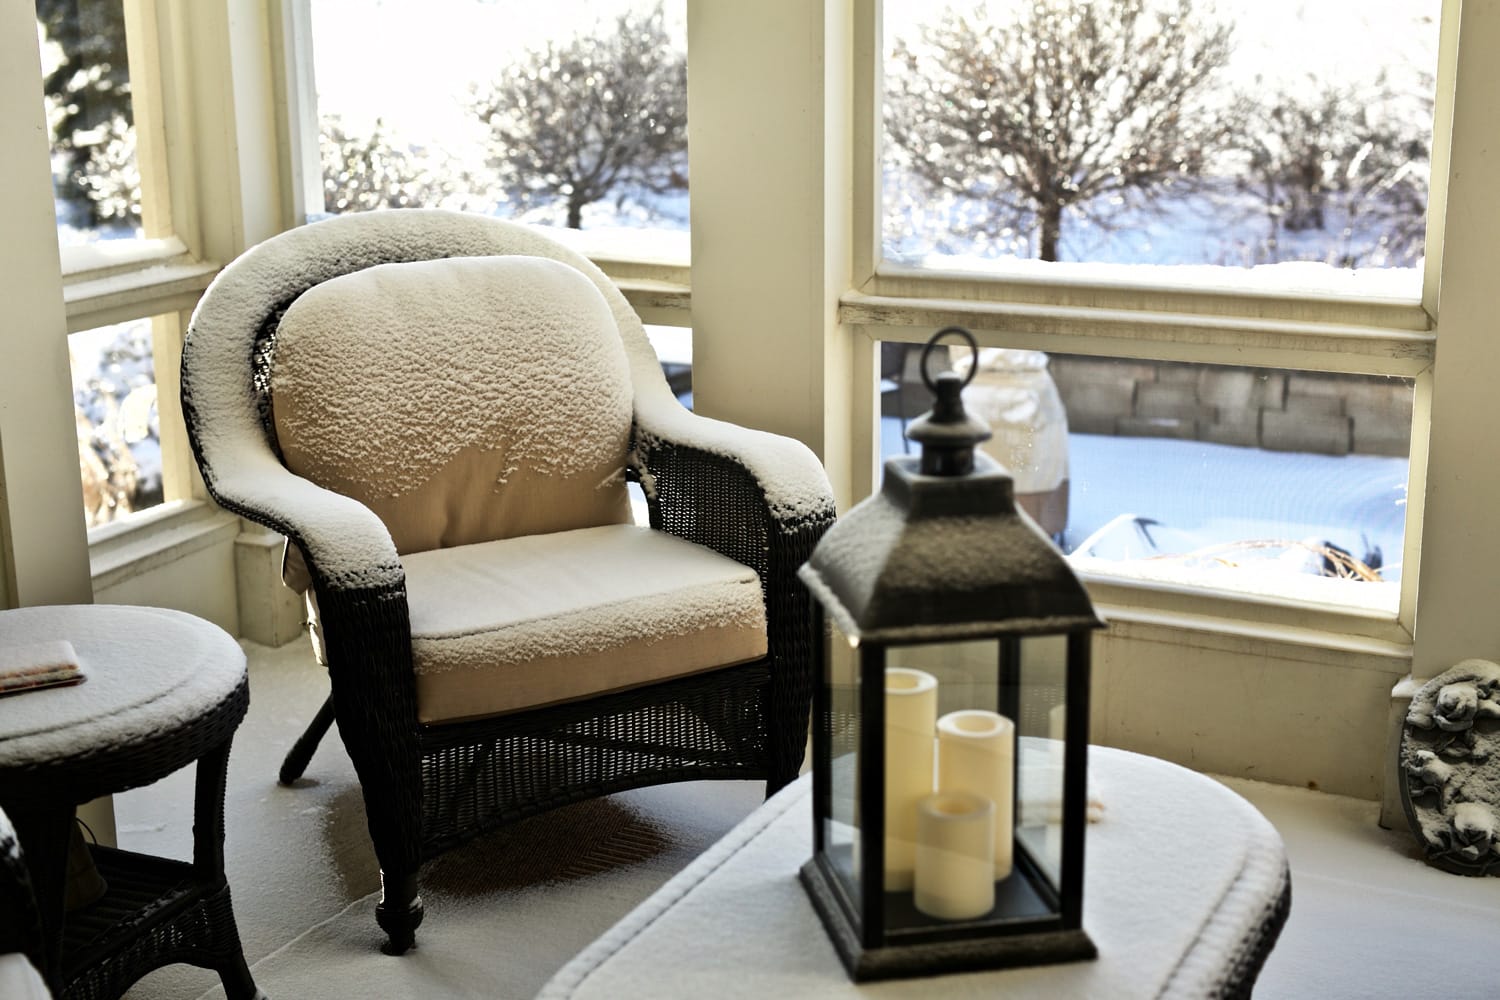 Cozy, warm inviting scene on patio with snow covered furniture on screened porch with view of winter scene outside.